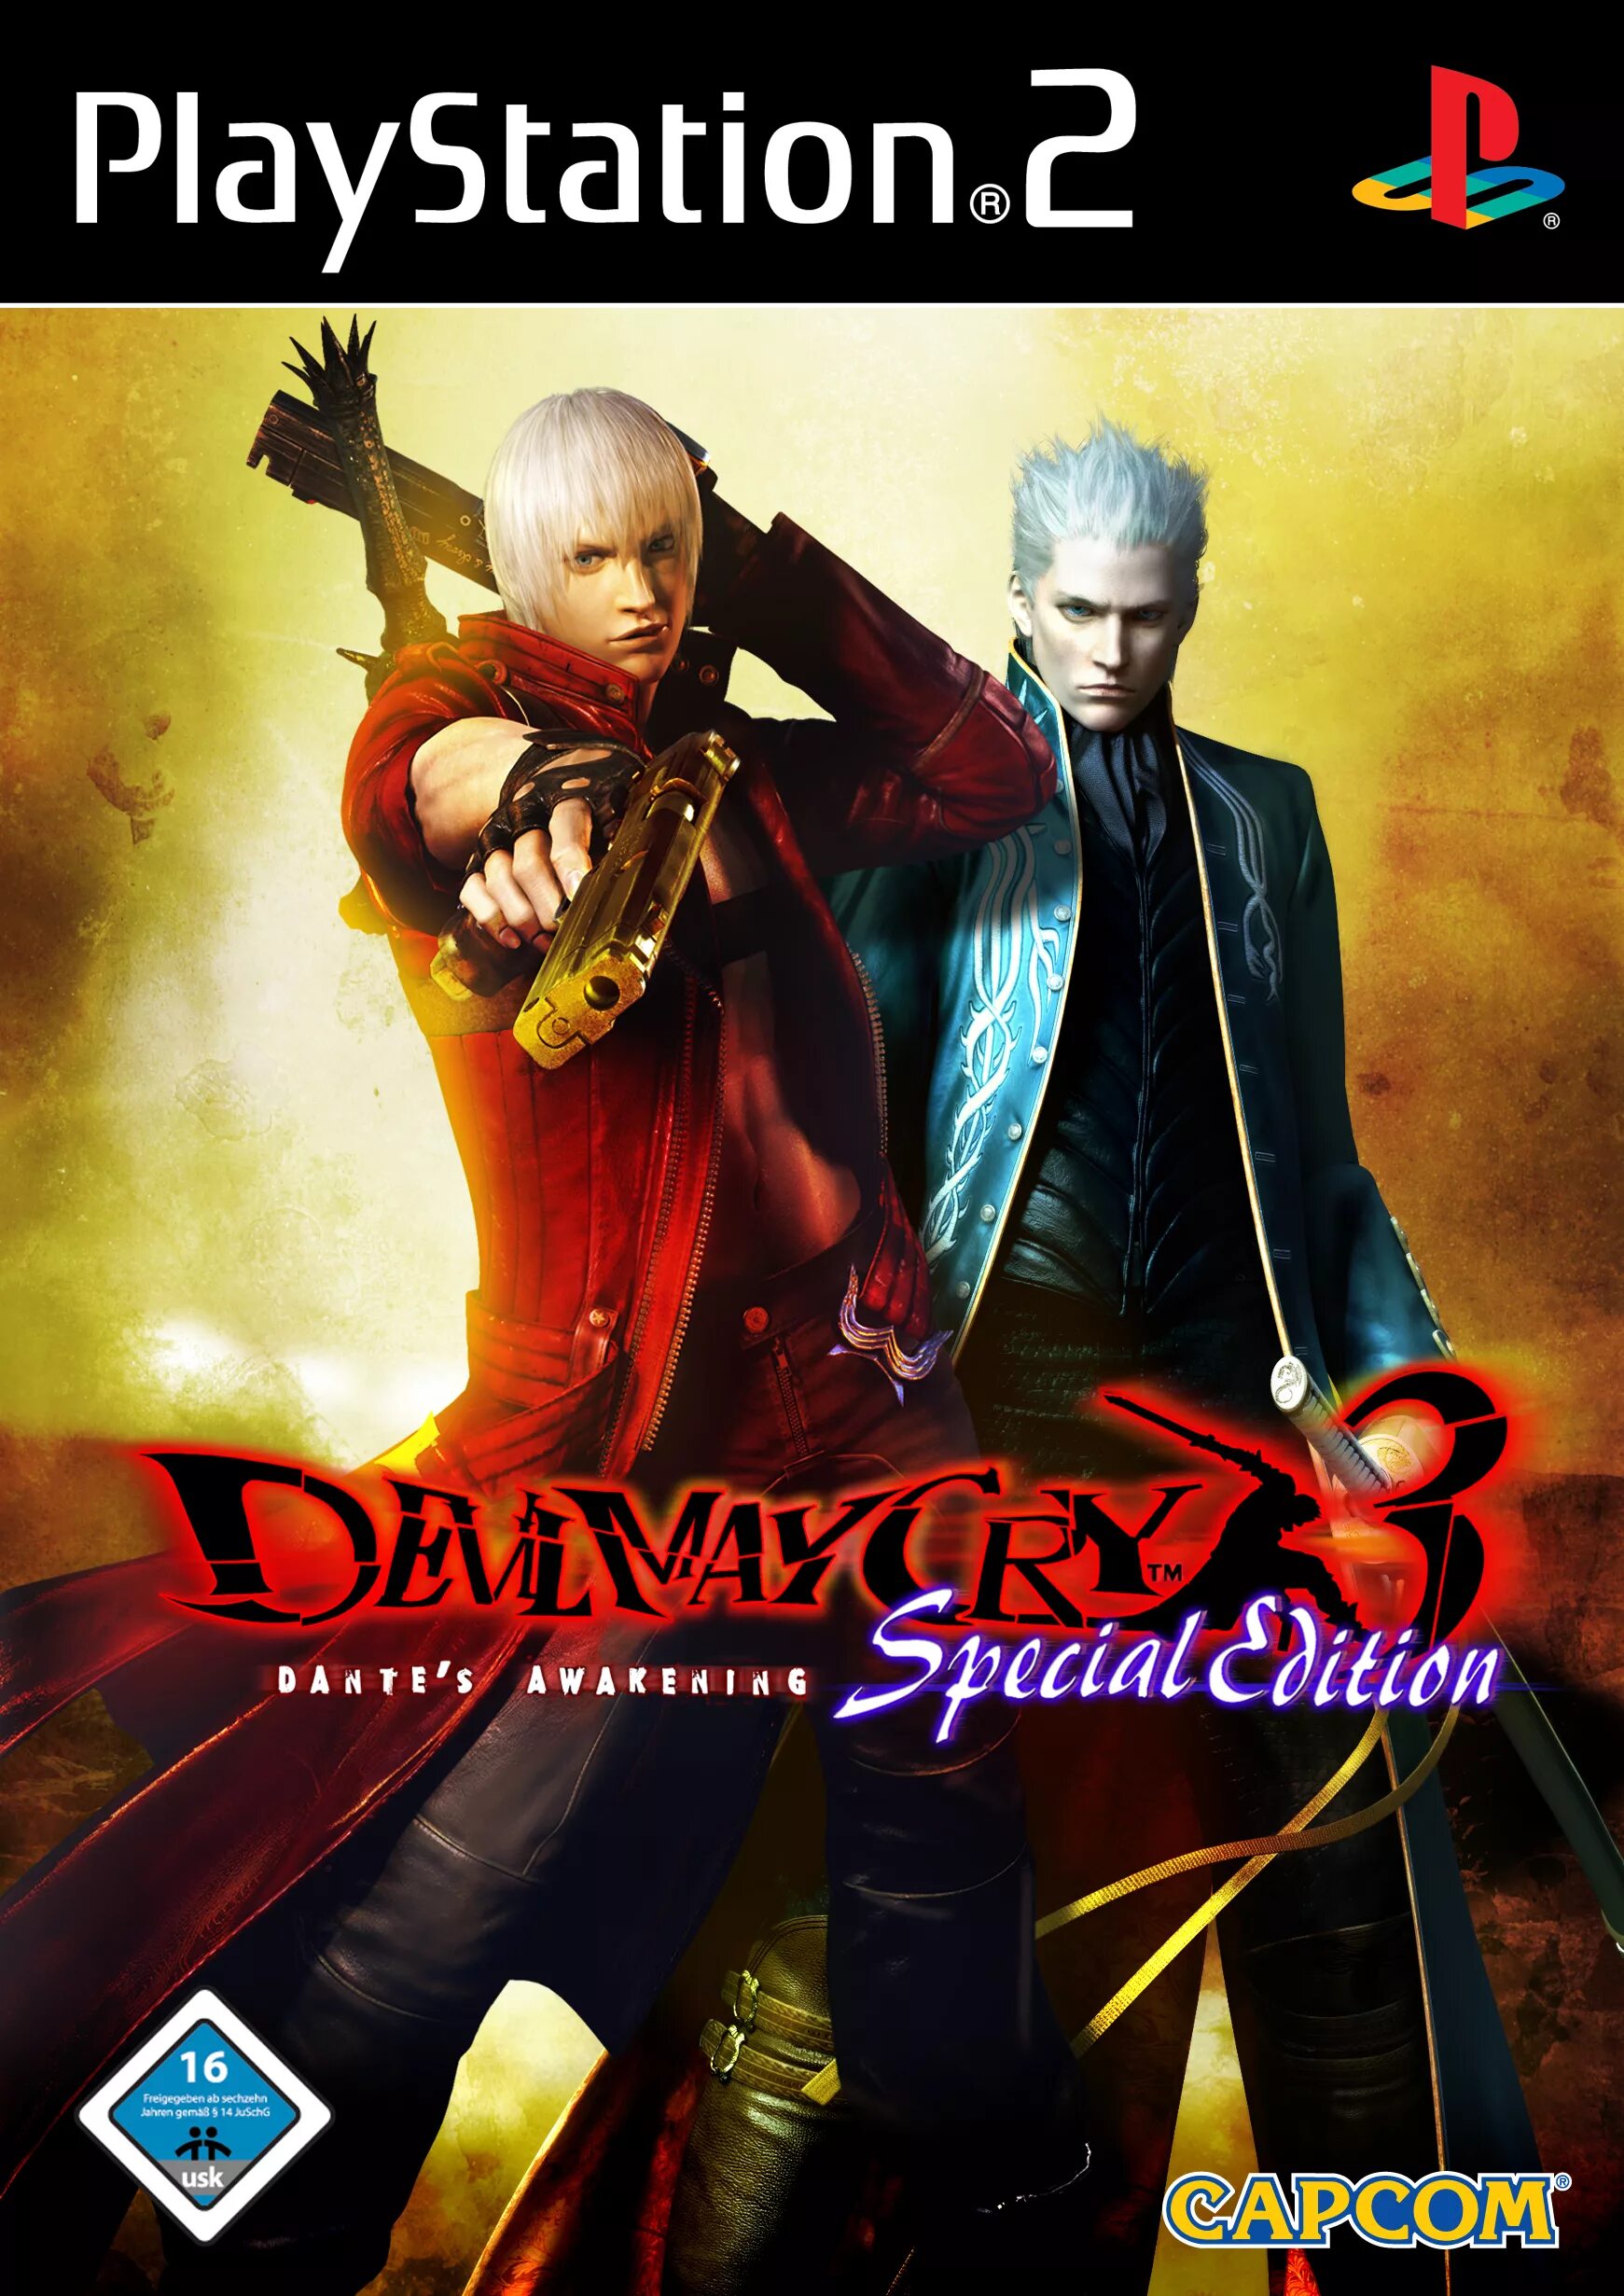 Devil May Cry 3 Special Edition ps2. Devil May Cry 3 ps2 Cover. Devil May Cry 3 ps2 обложка. DMC 3 ps2 Cover. Dmc 3 special